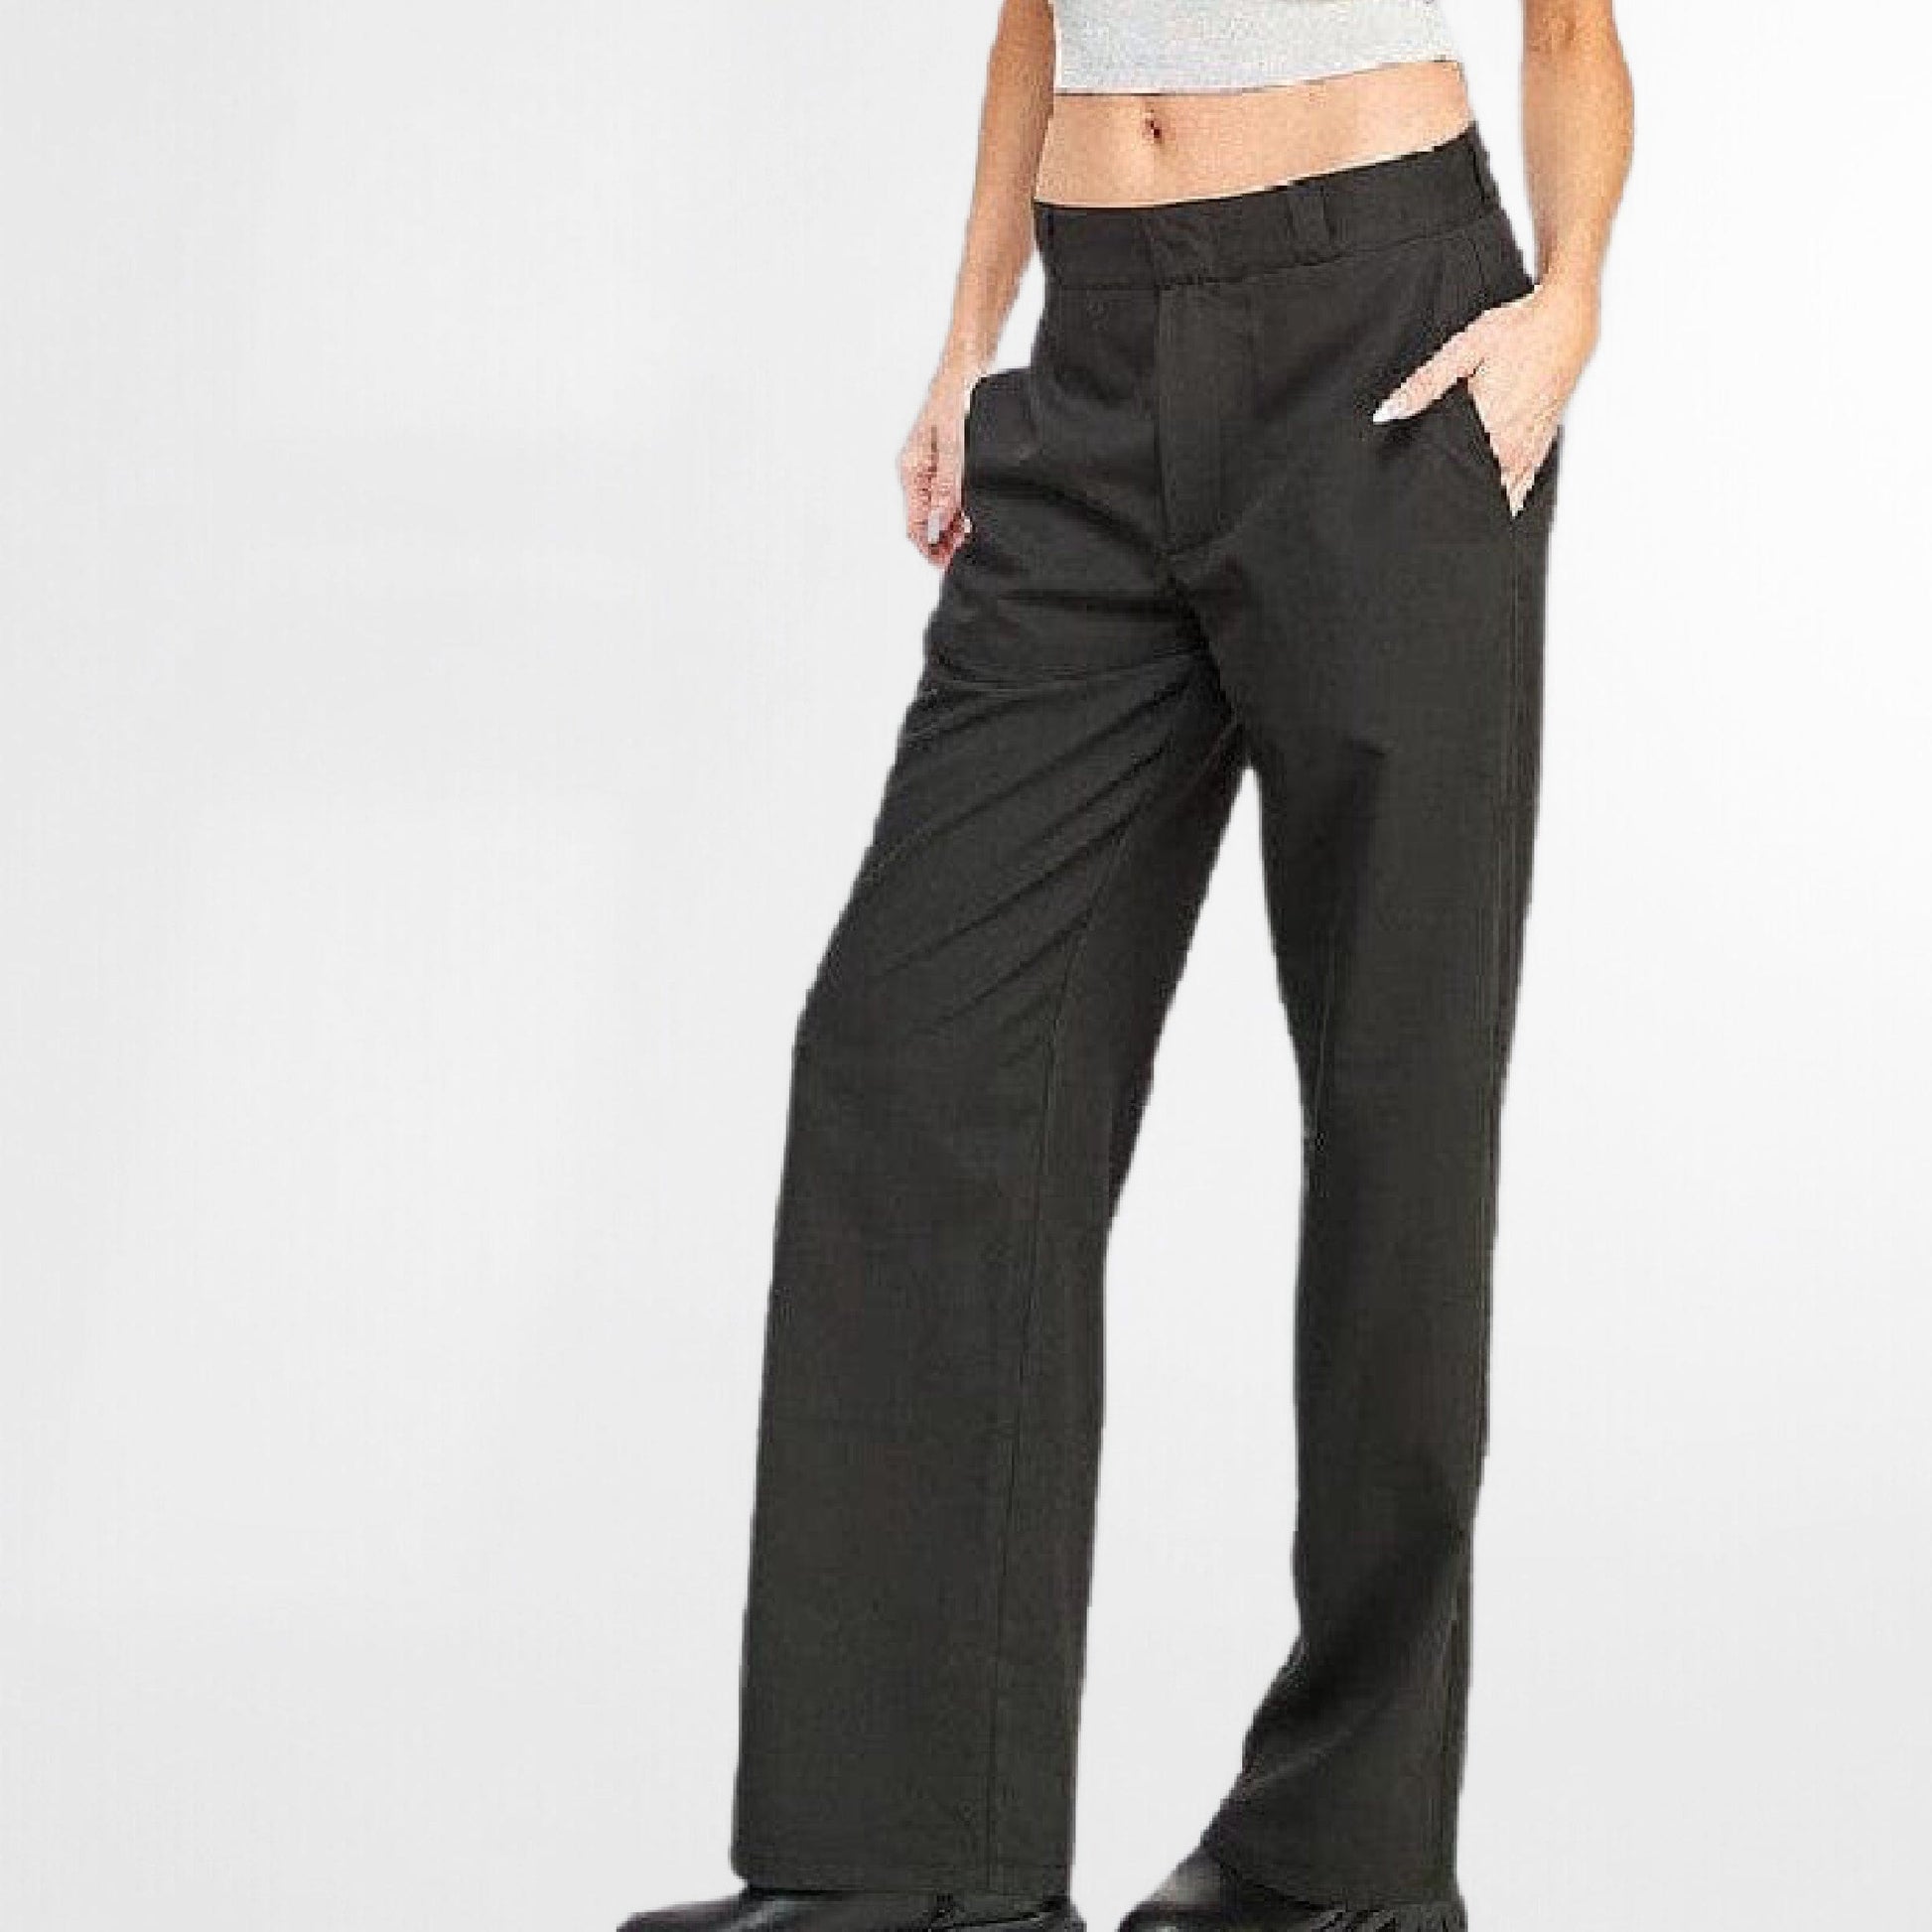 The Perfect Relaxed Fit High Rise Trouser Posh Society Boutique Pants Visit poshsocietyhb